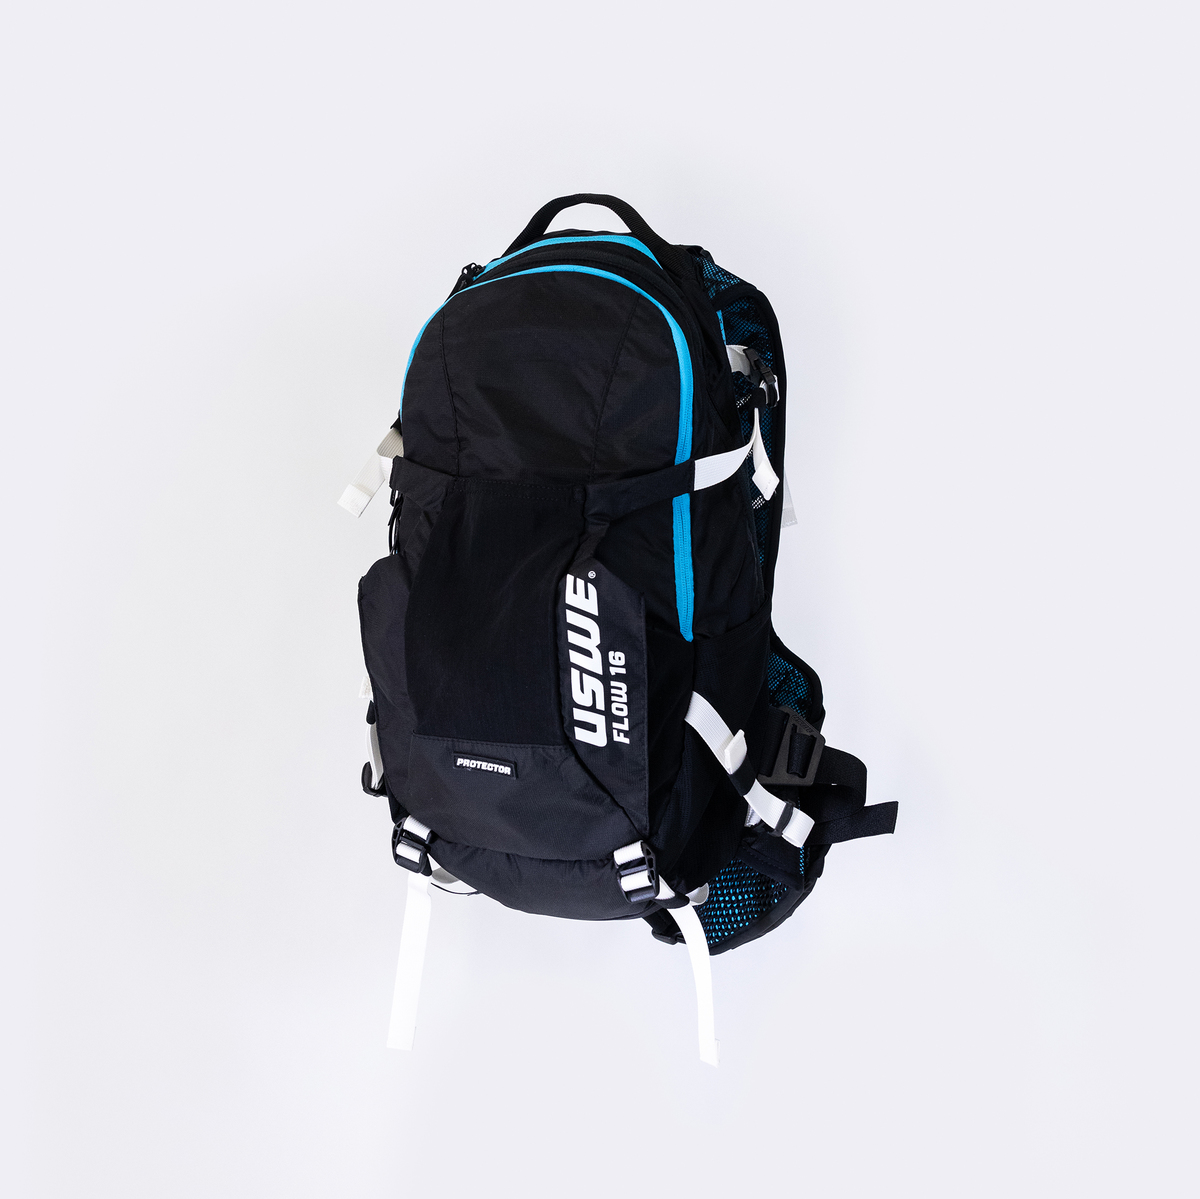 5_USWE Flow 14 Protector backpack designed by KISKA_front 3-4 view_Square